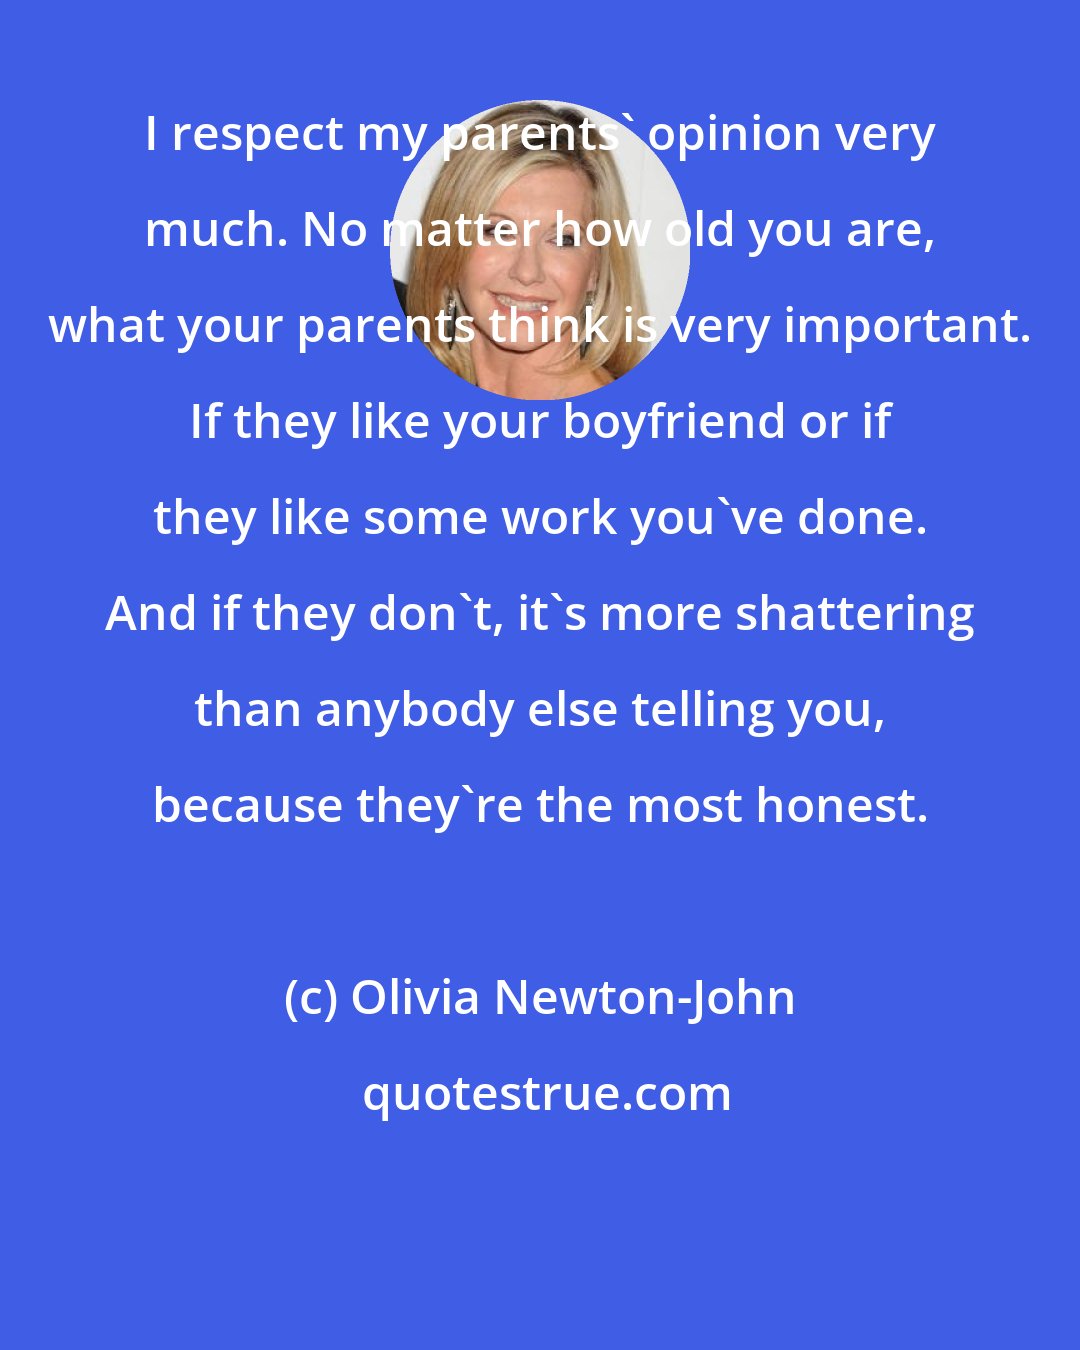 Olivia Newton-John: I respect my parents' opinion very much. No matter how old you are, what your parents think is very important. If they like your boyfriend or if they like some work you've done. And if they don't, it's more shattering than anybody else telling you, because they're the most honest.